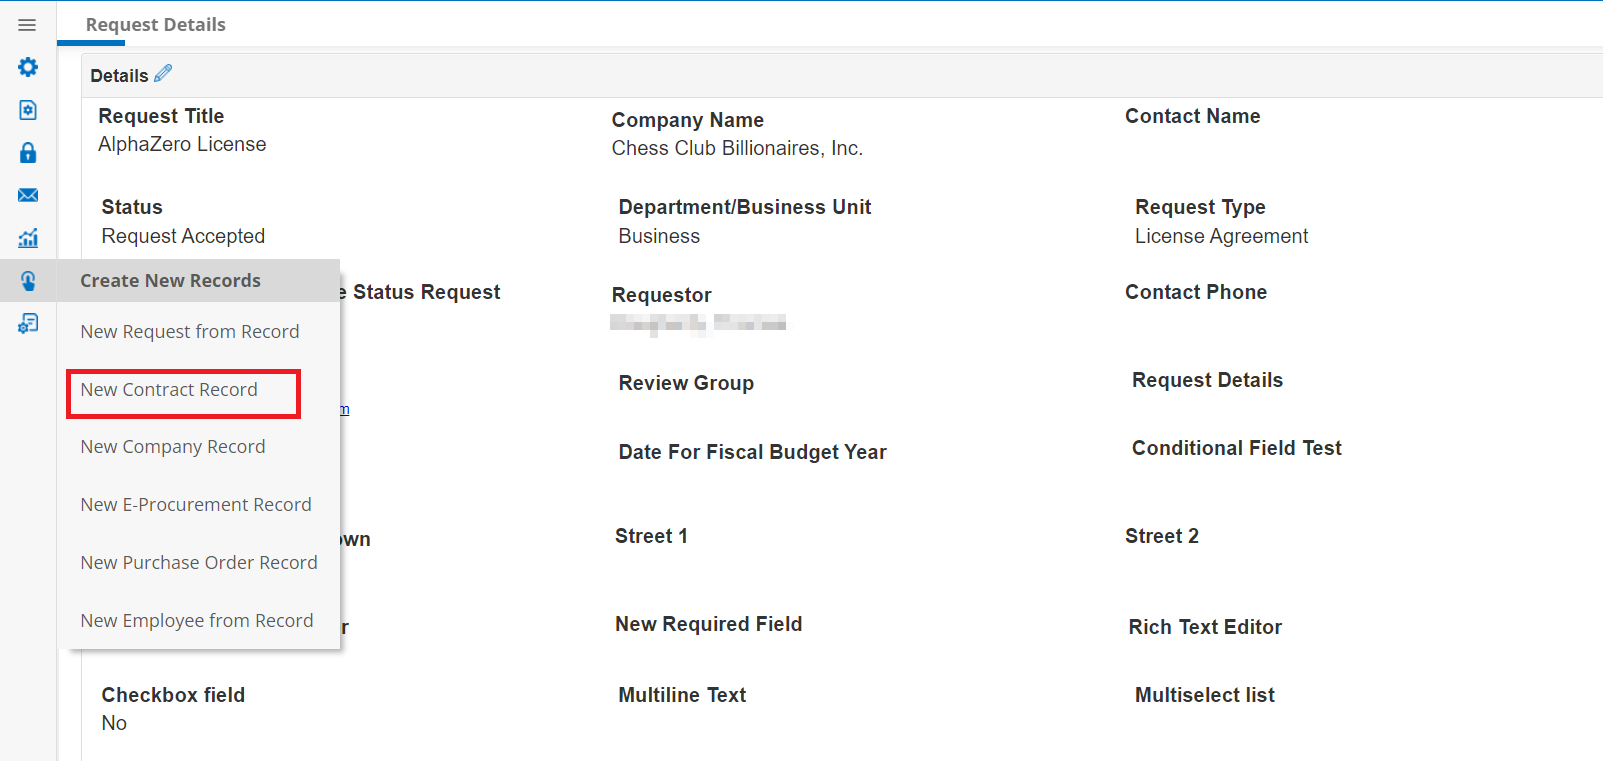 New Contract Record on Side Menu of Request Details Page